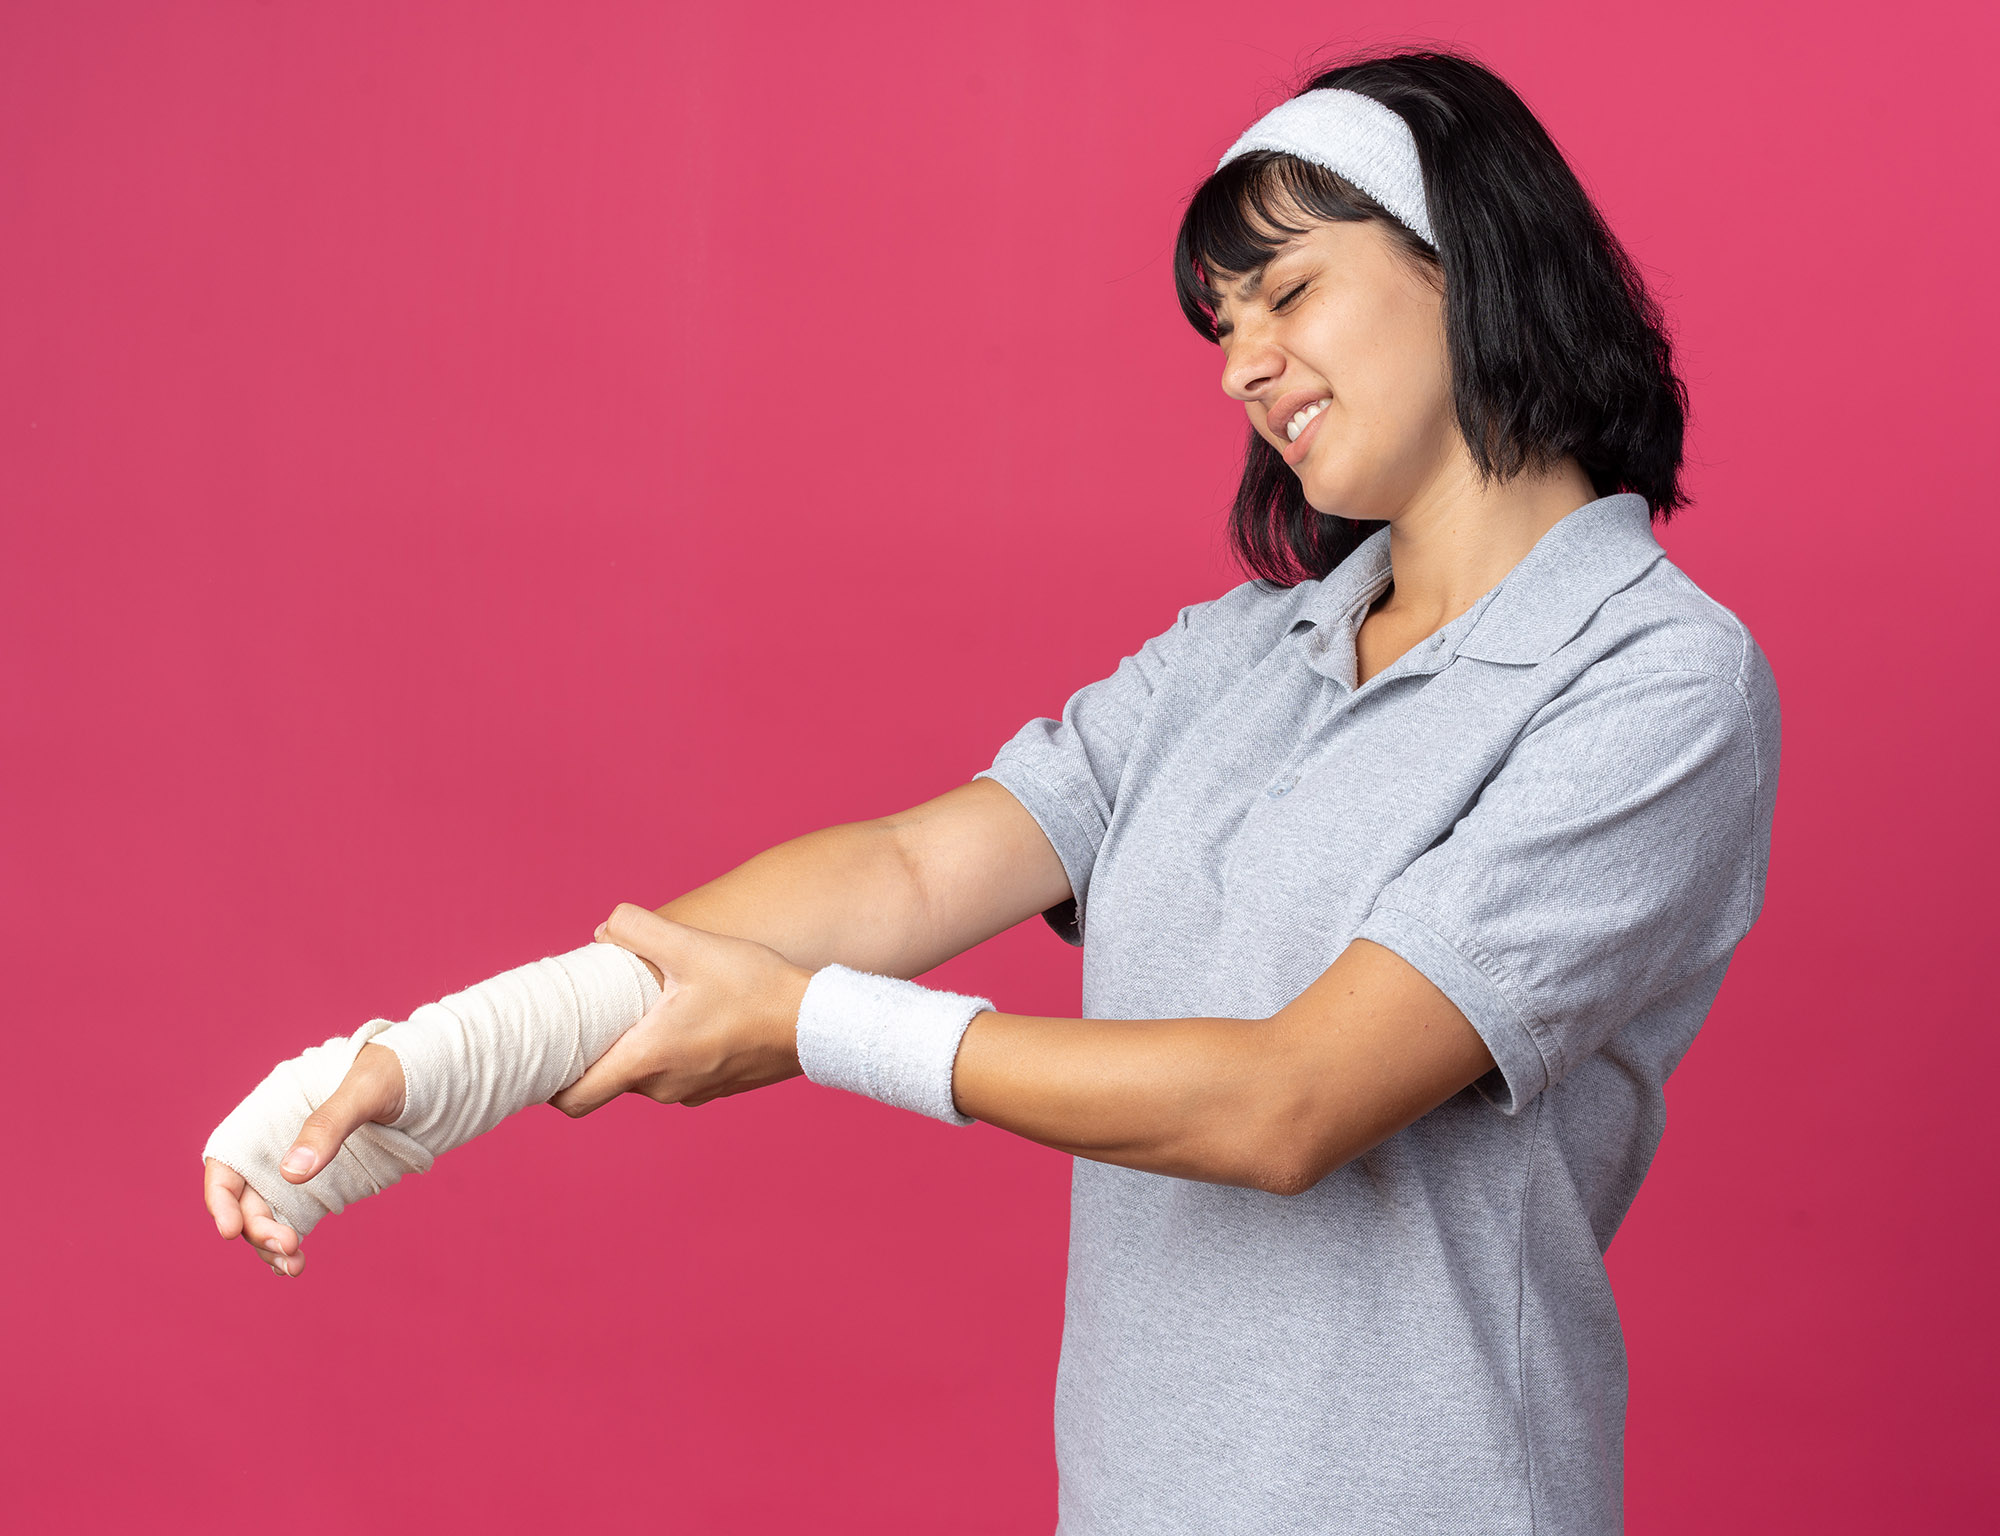 Treatment Options for Tennis Elbow